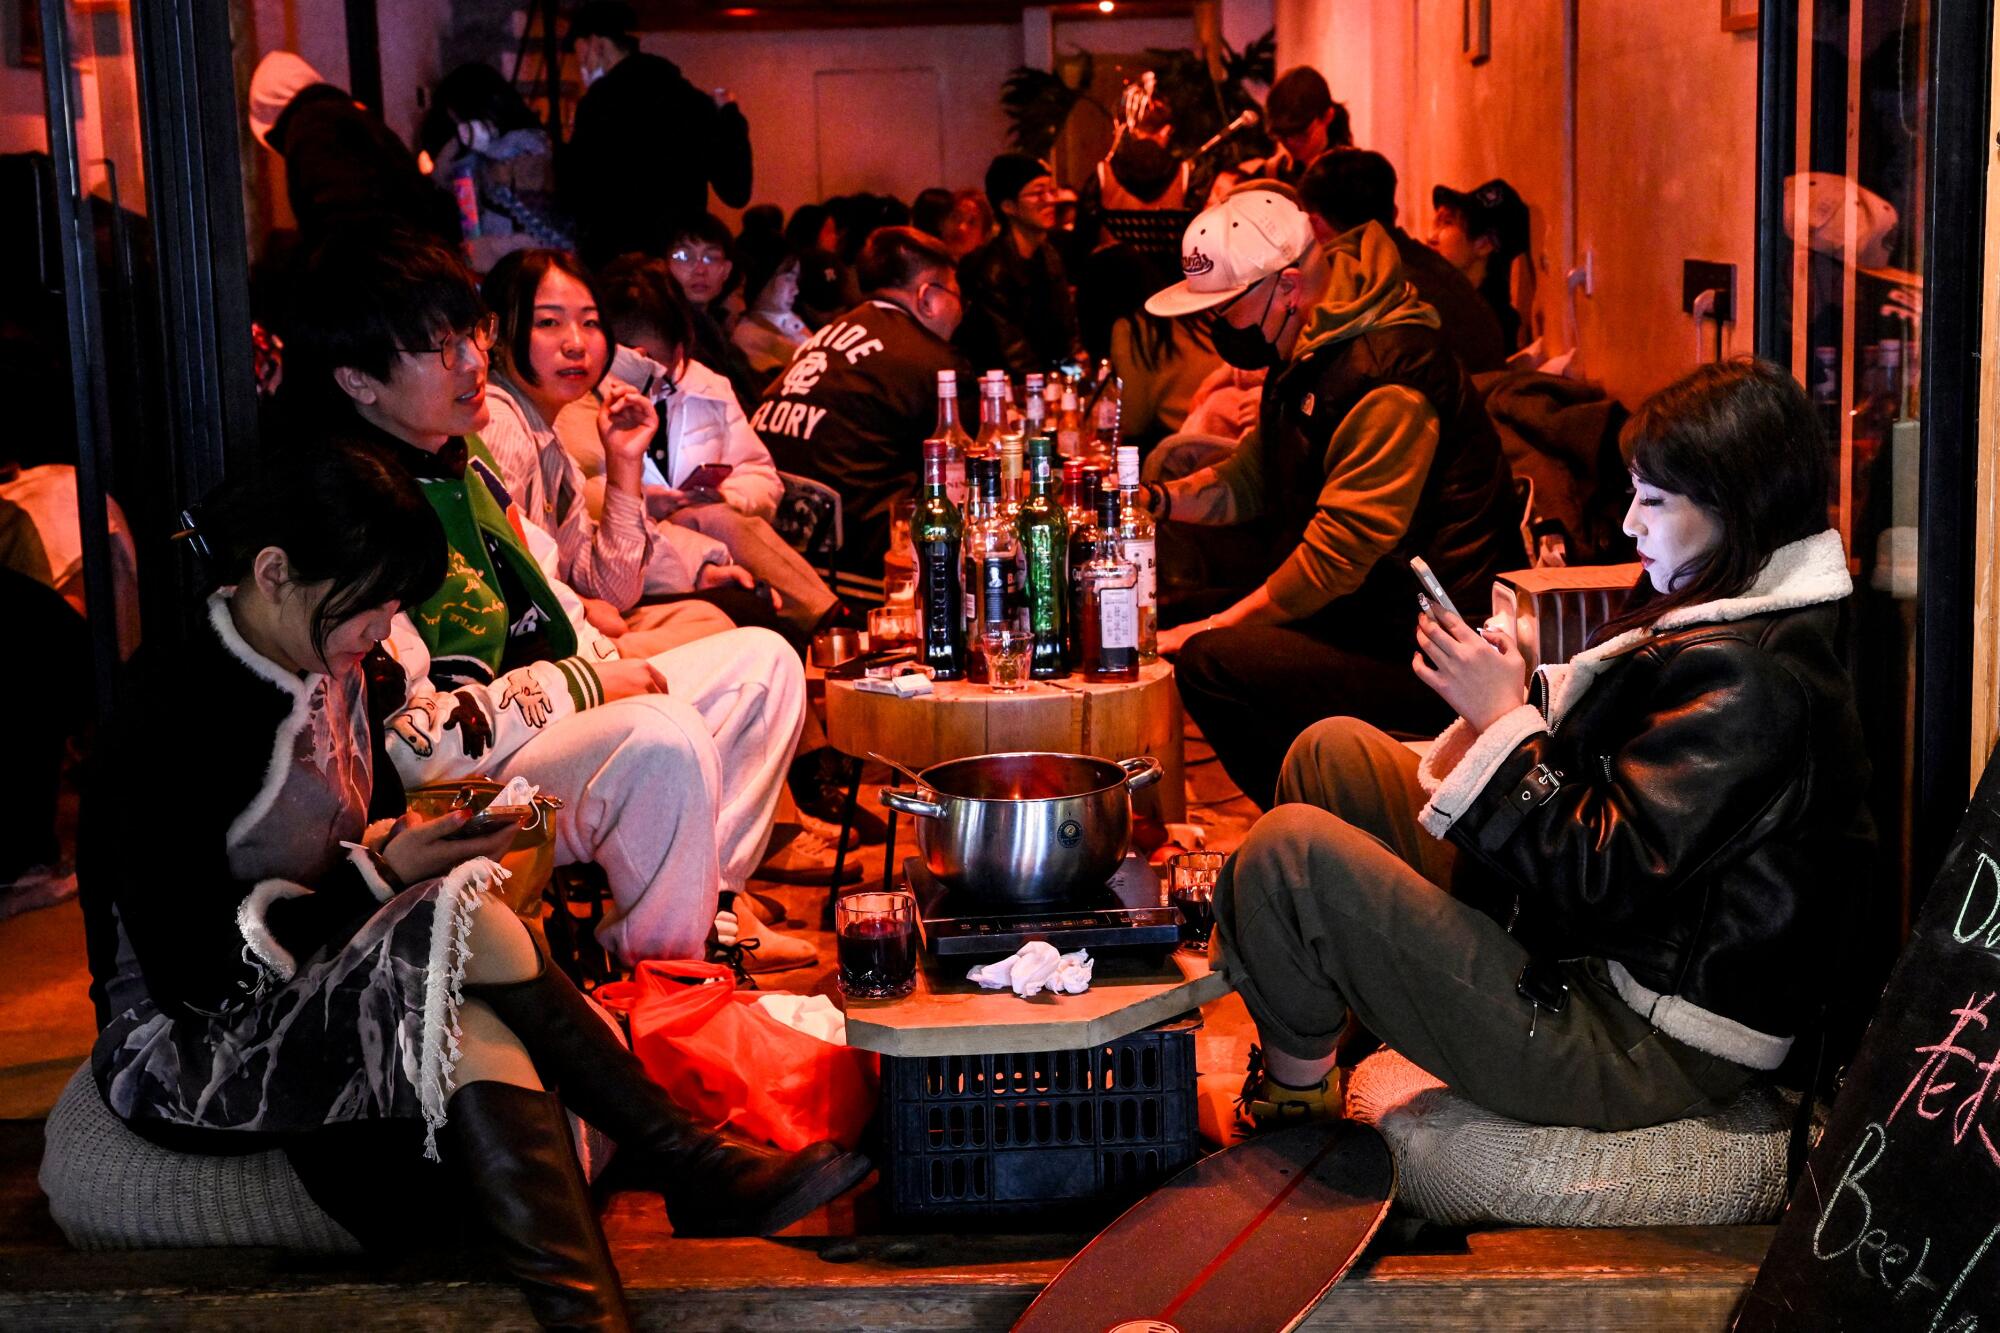 People sitting on cushions around low tables with bottles or a pot at a bar.